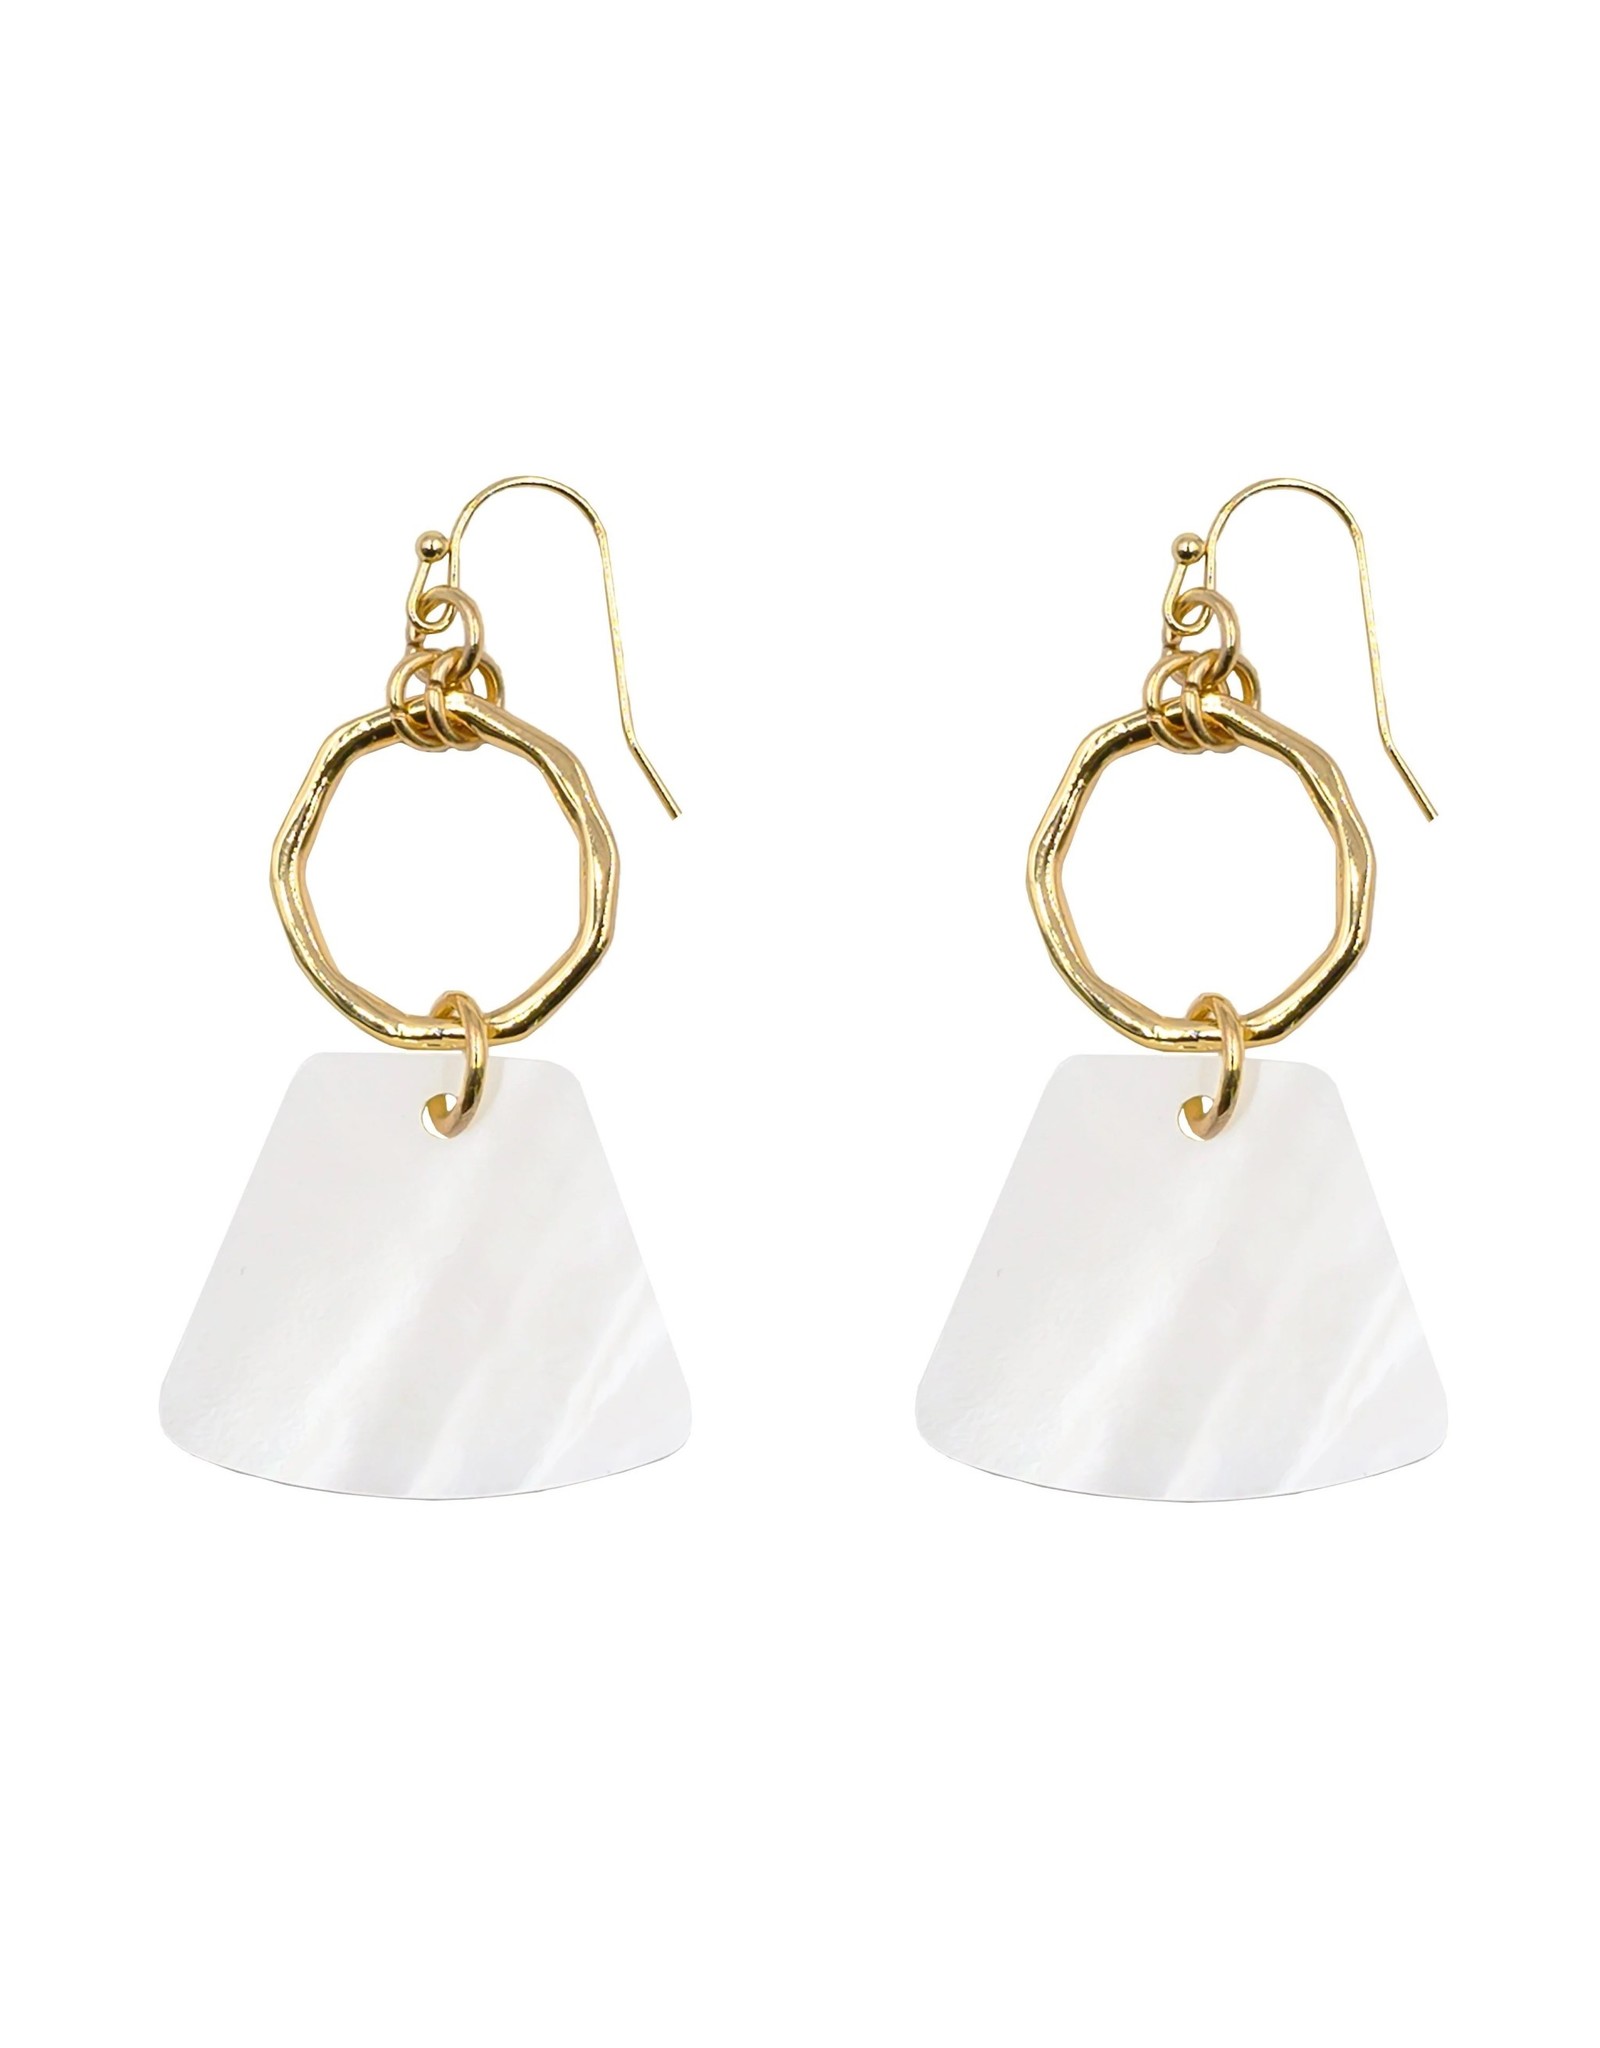 Kinsley Armelle Diana Collection - Pearl Earrings Gold